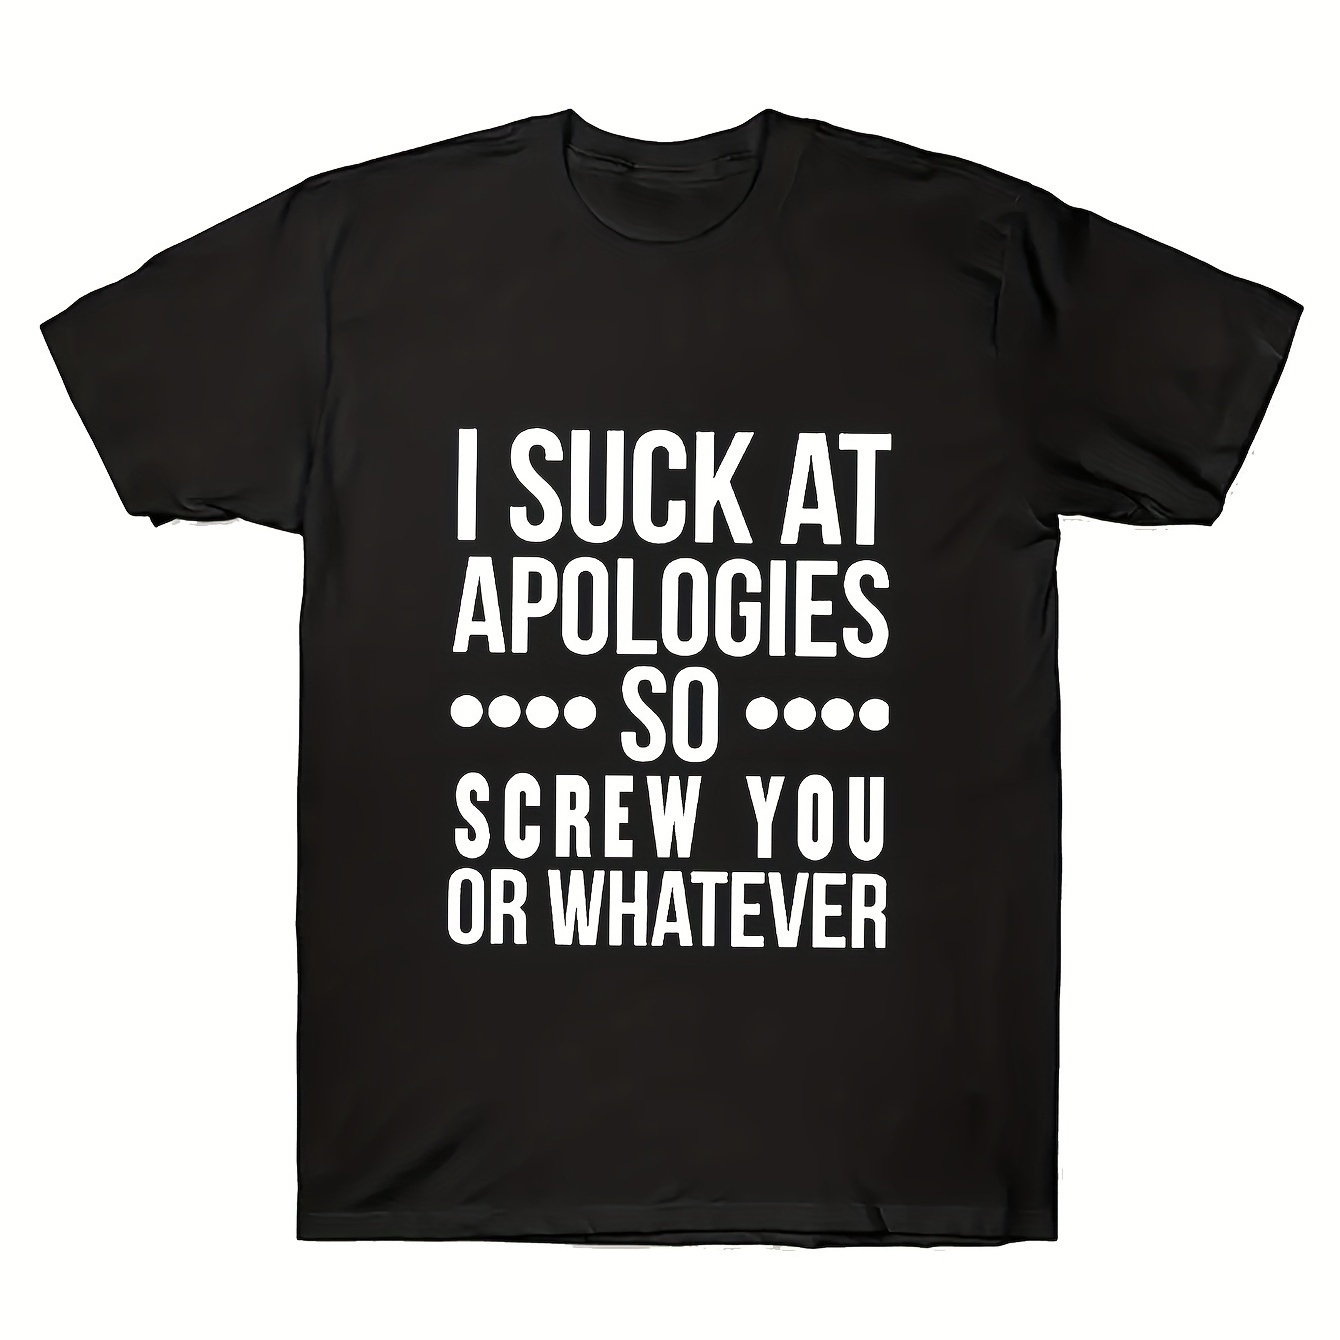 

Men's Front Print T-shirt I Suck At Apologies So Screw You Or Whatever Cotton Funny Print Tee Summer Casual Tee Top